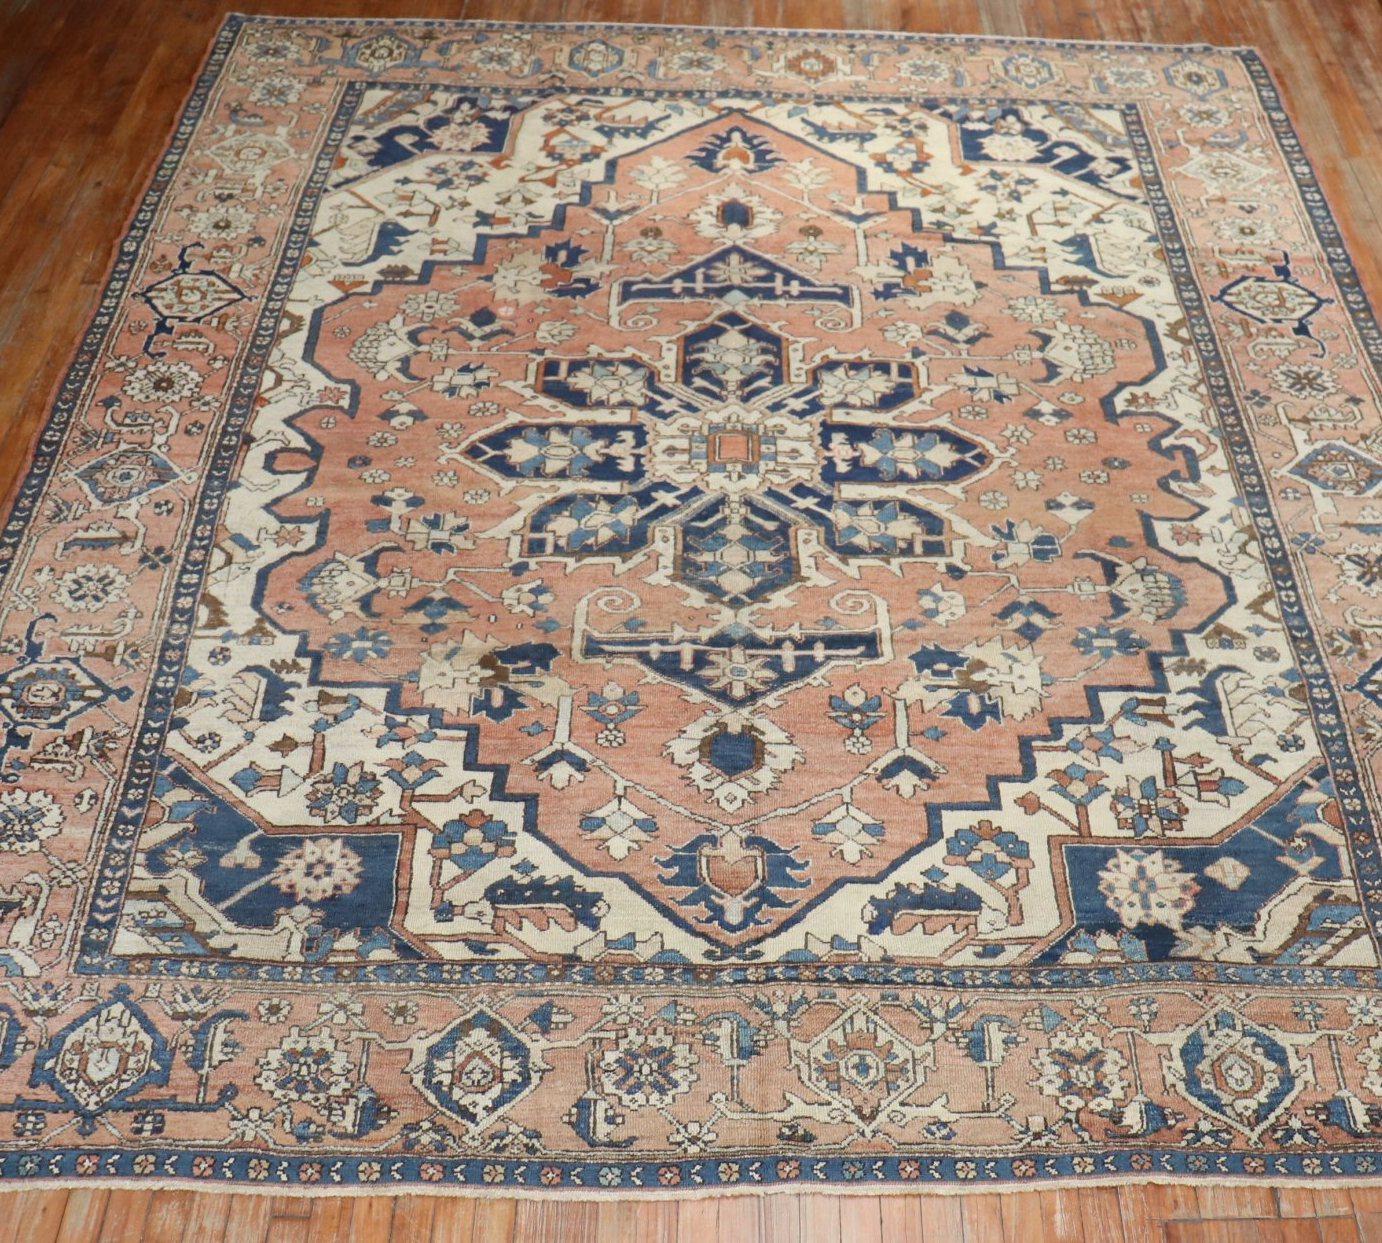 Room size Persian Heriz rug. Light rust, accents in antique white and navy.

Measures: 9'11